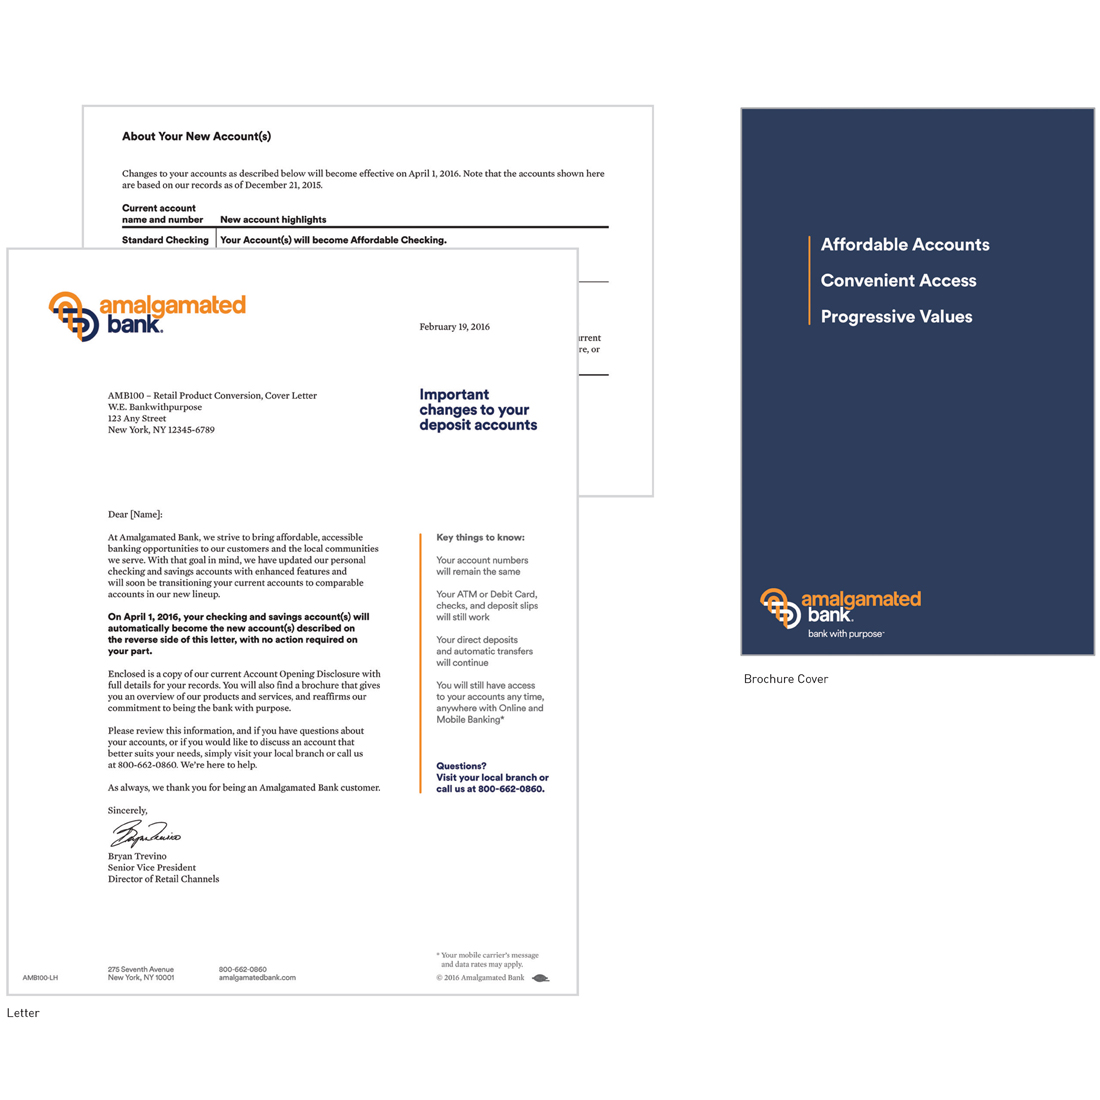 Amalgamated Bank product conversion brochure and letter with account changes